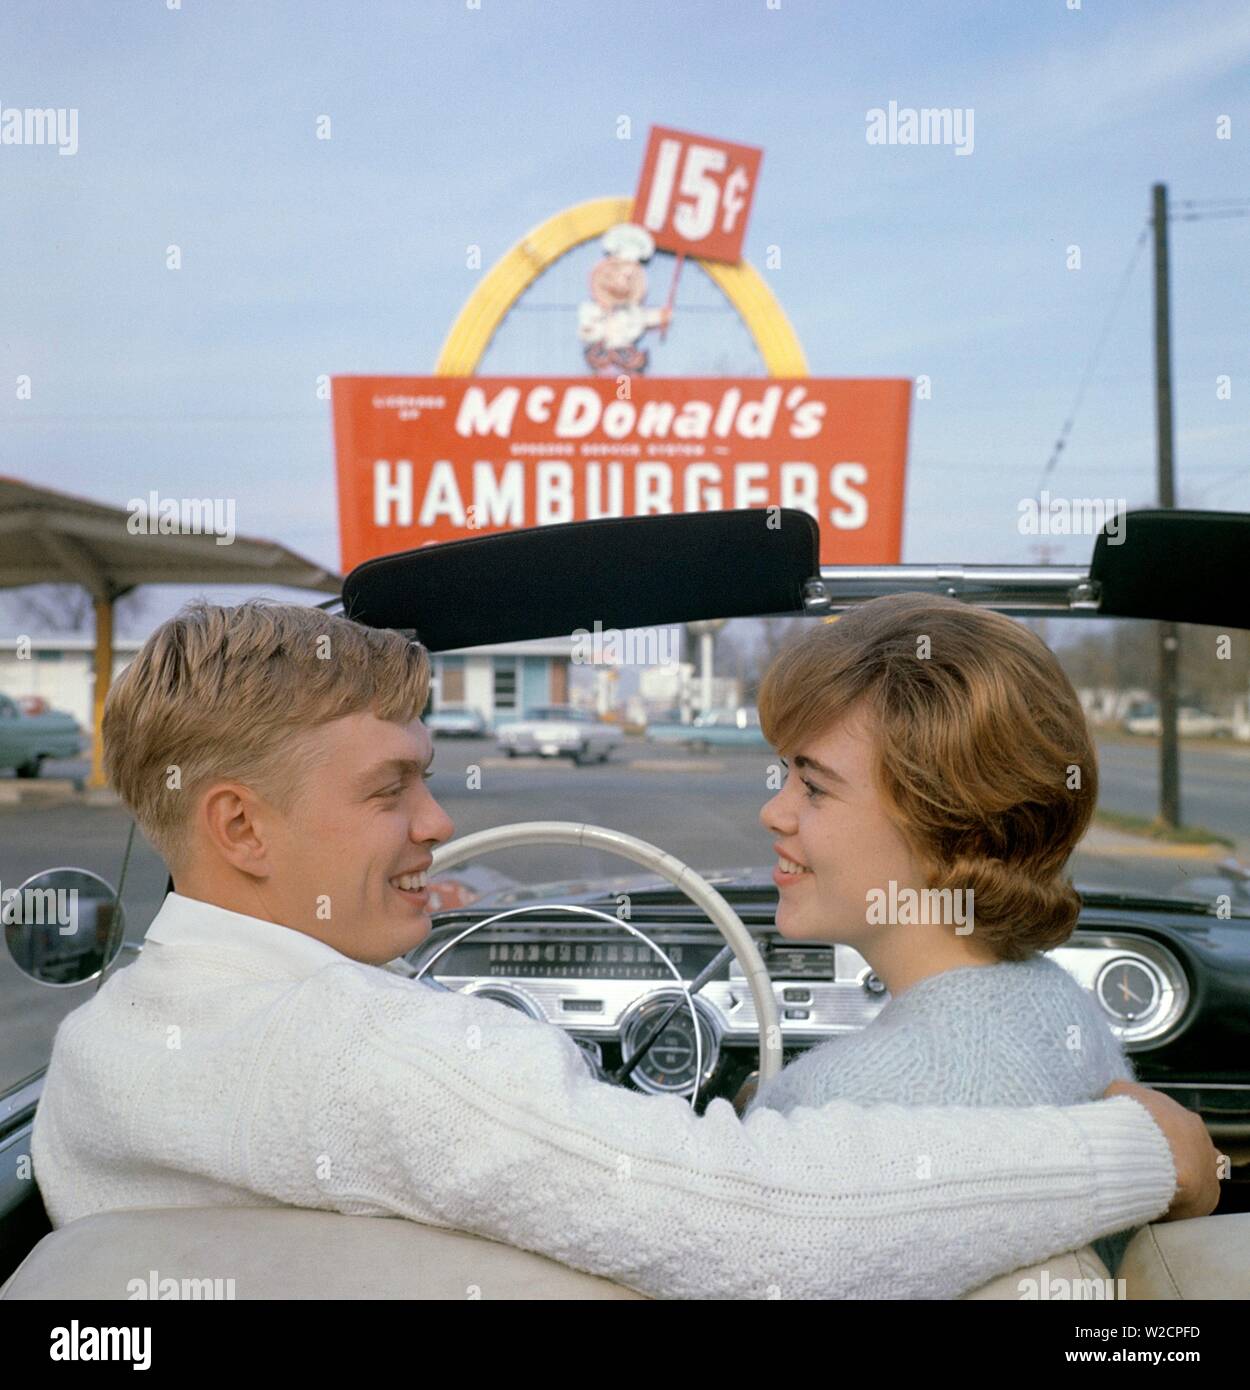 Fast food in the 1950s. A young couple in their convertible car with a McDonald's sign in the background. The yellow arch being part of the original design called the Golden Arches was first used 1953.  The cost of a limited menu hamburger, shake and fries was 15 cents. 1950s 1960s ref 5-40-4 Stock Photo